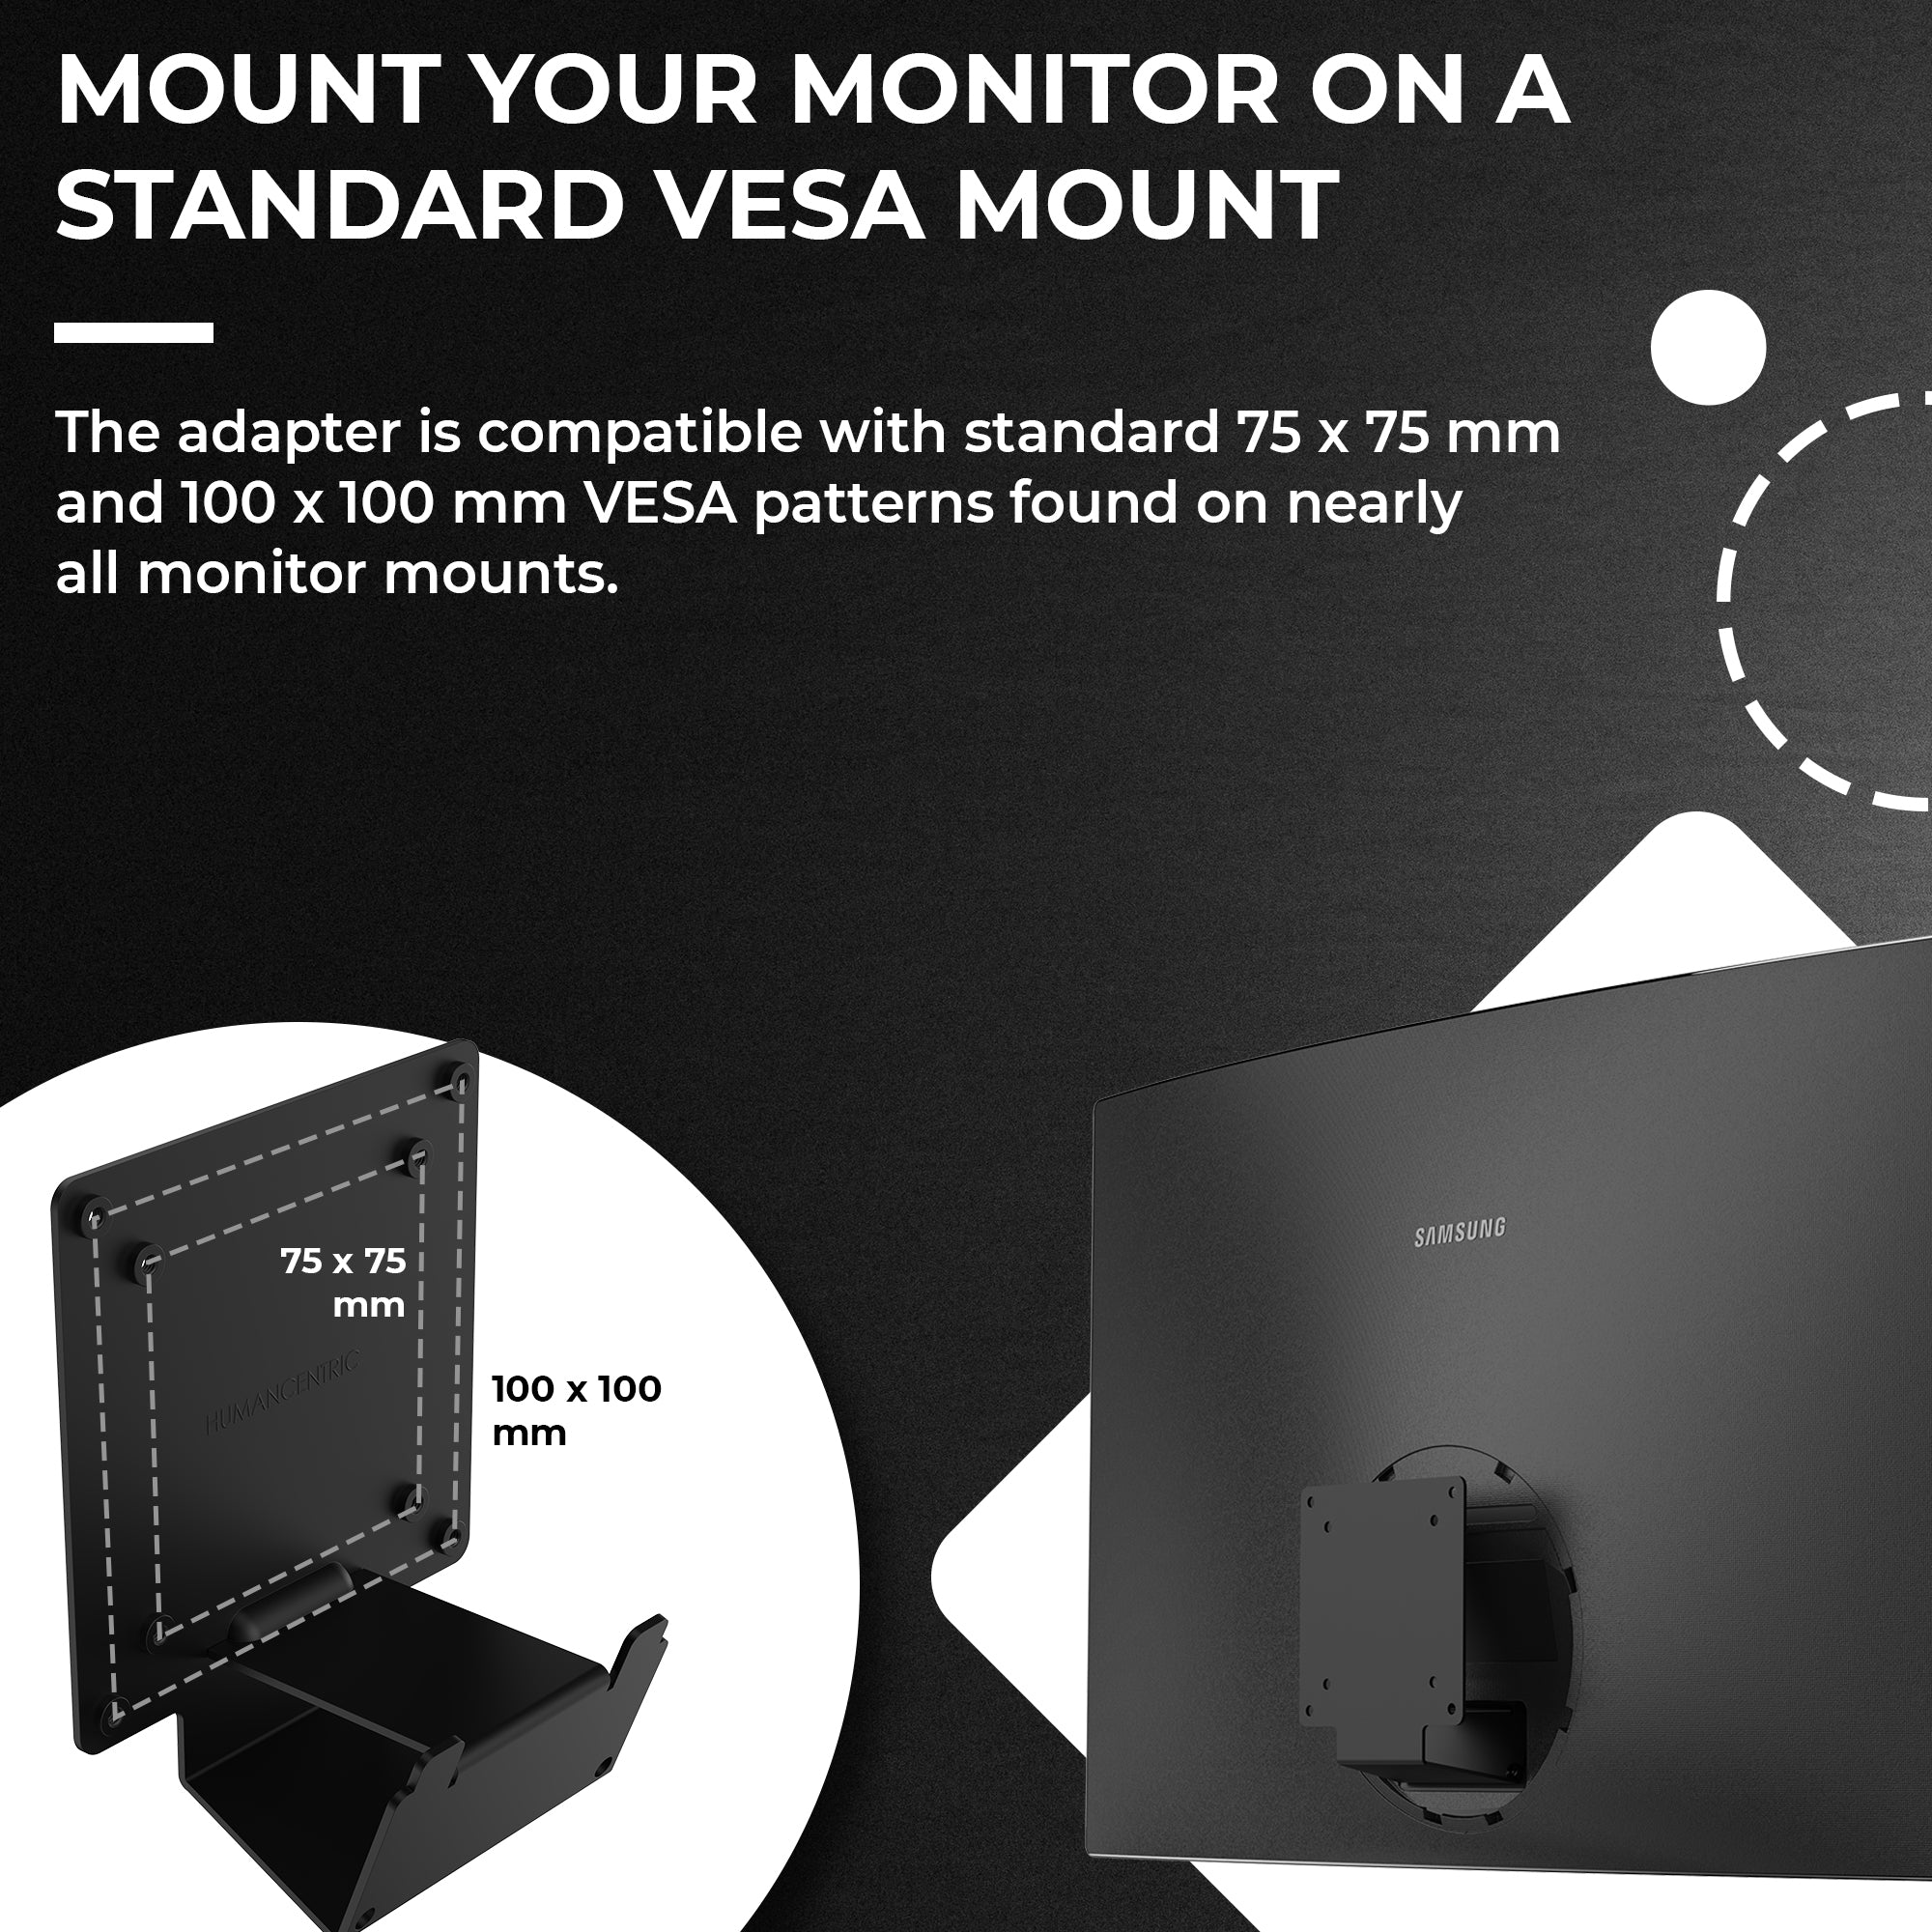 HumanCentric VESA Mount Adapter Compatible with Dell India